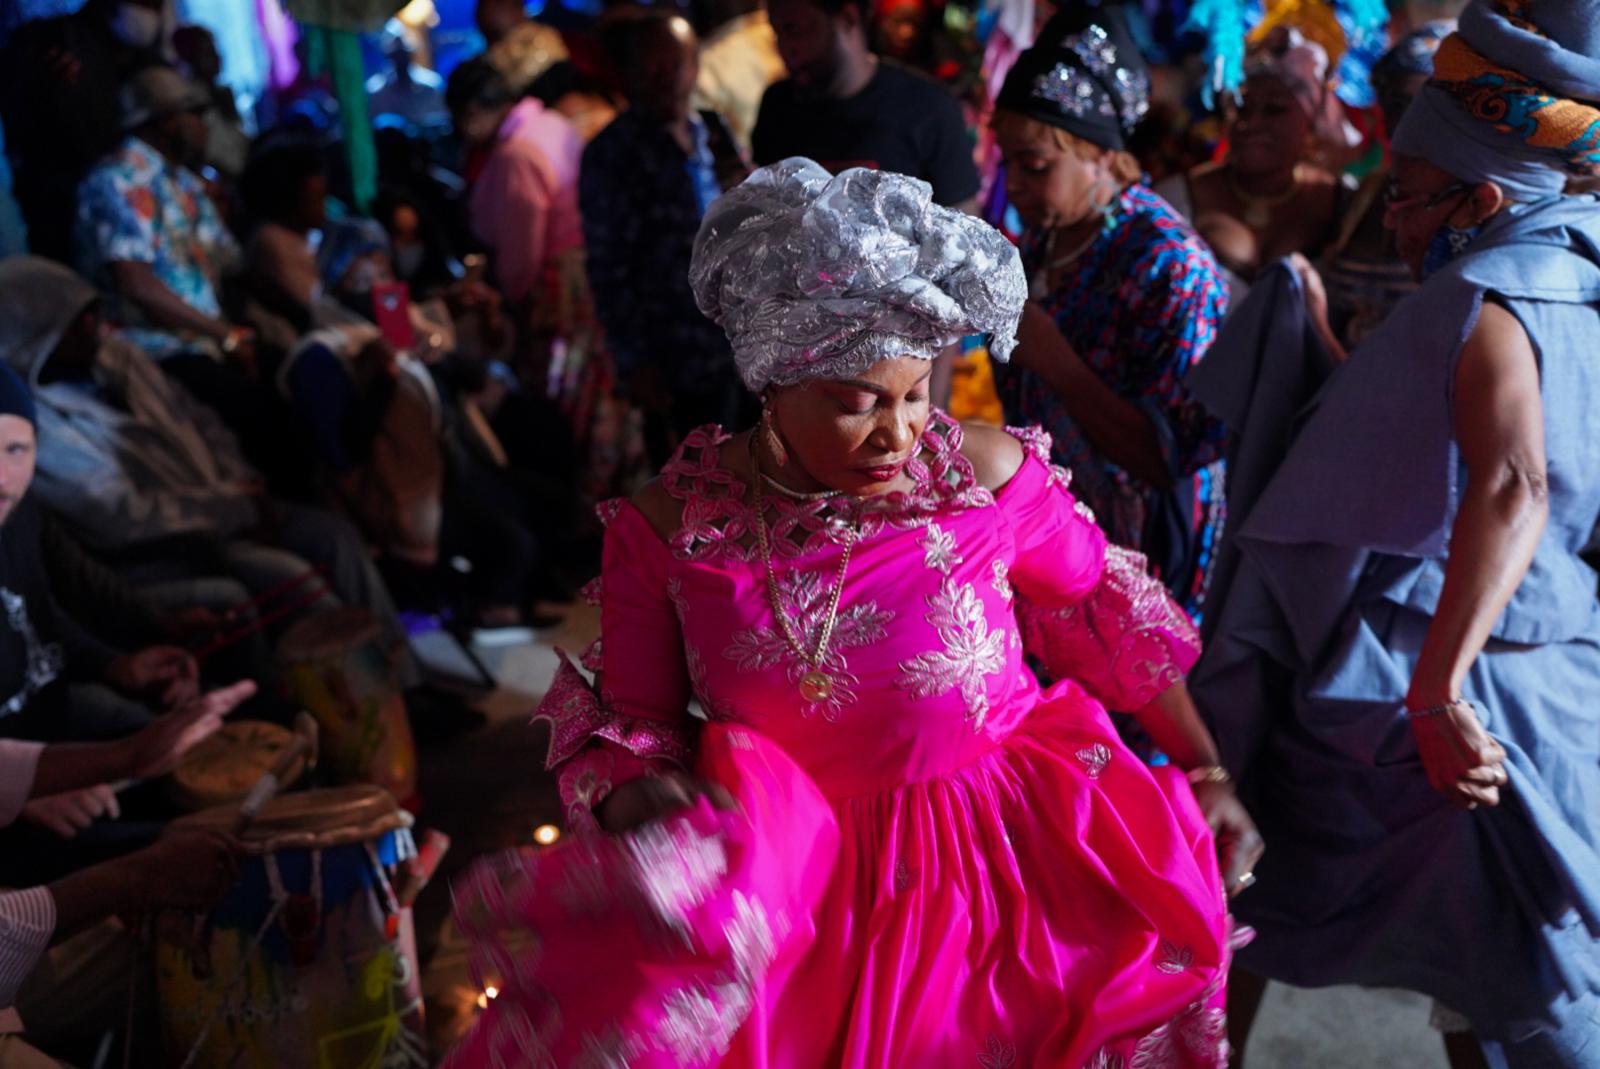 Vodou believers perform a ritual during a ceremony to honor their ancestors in a basement that serves as a temple in Brooklyn, New York. New York has the second-largest Haitian population in the United States after Miami.